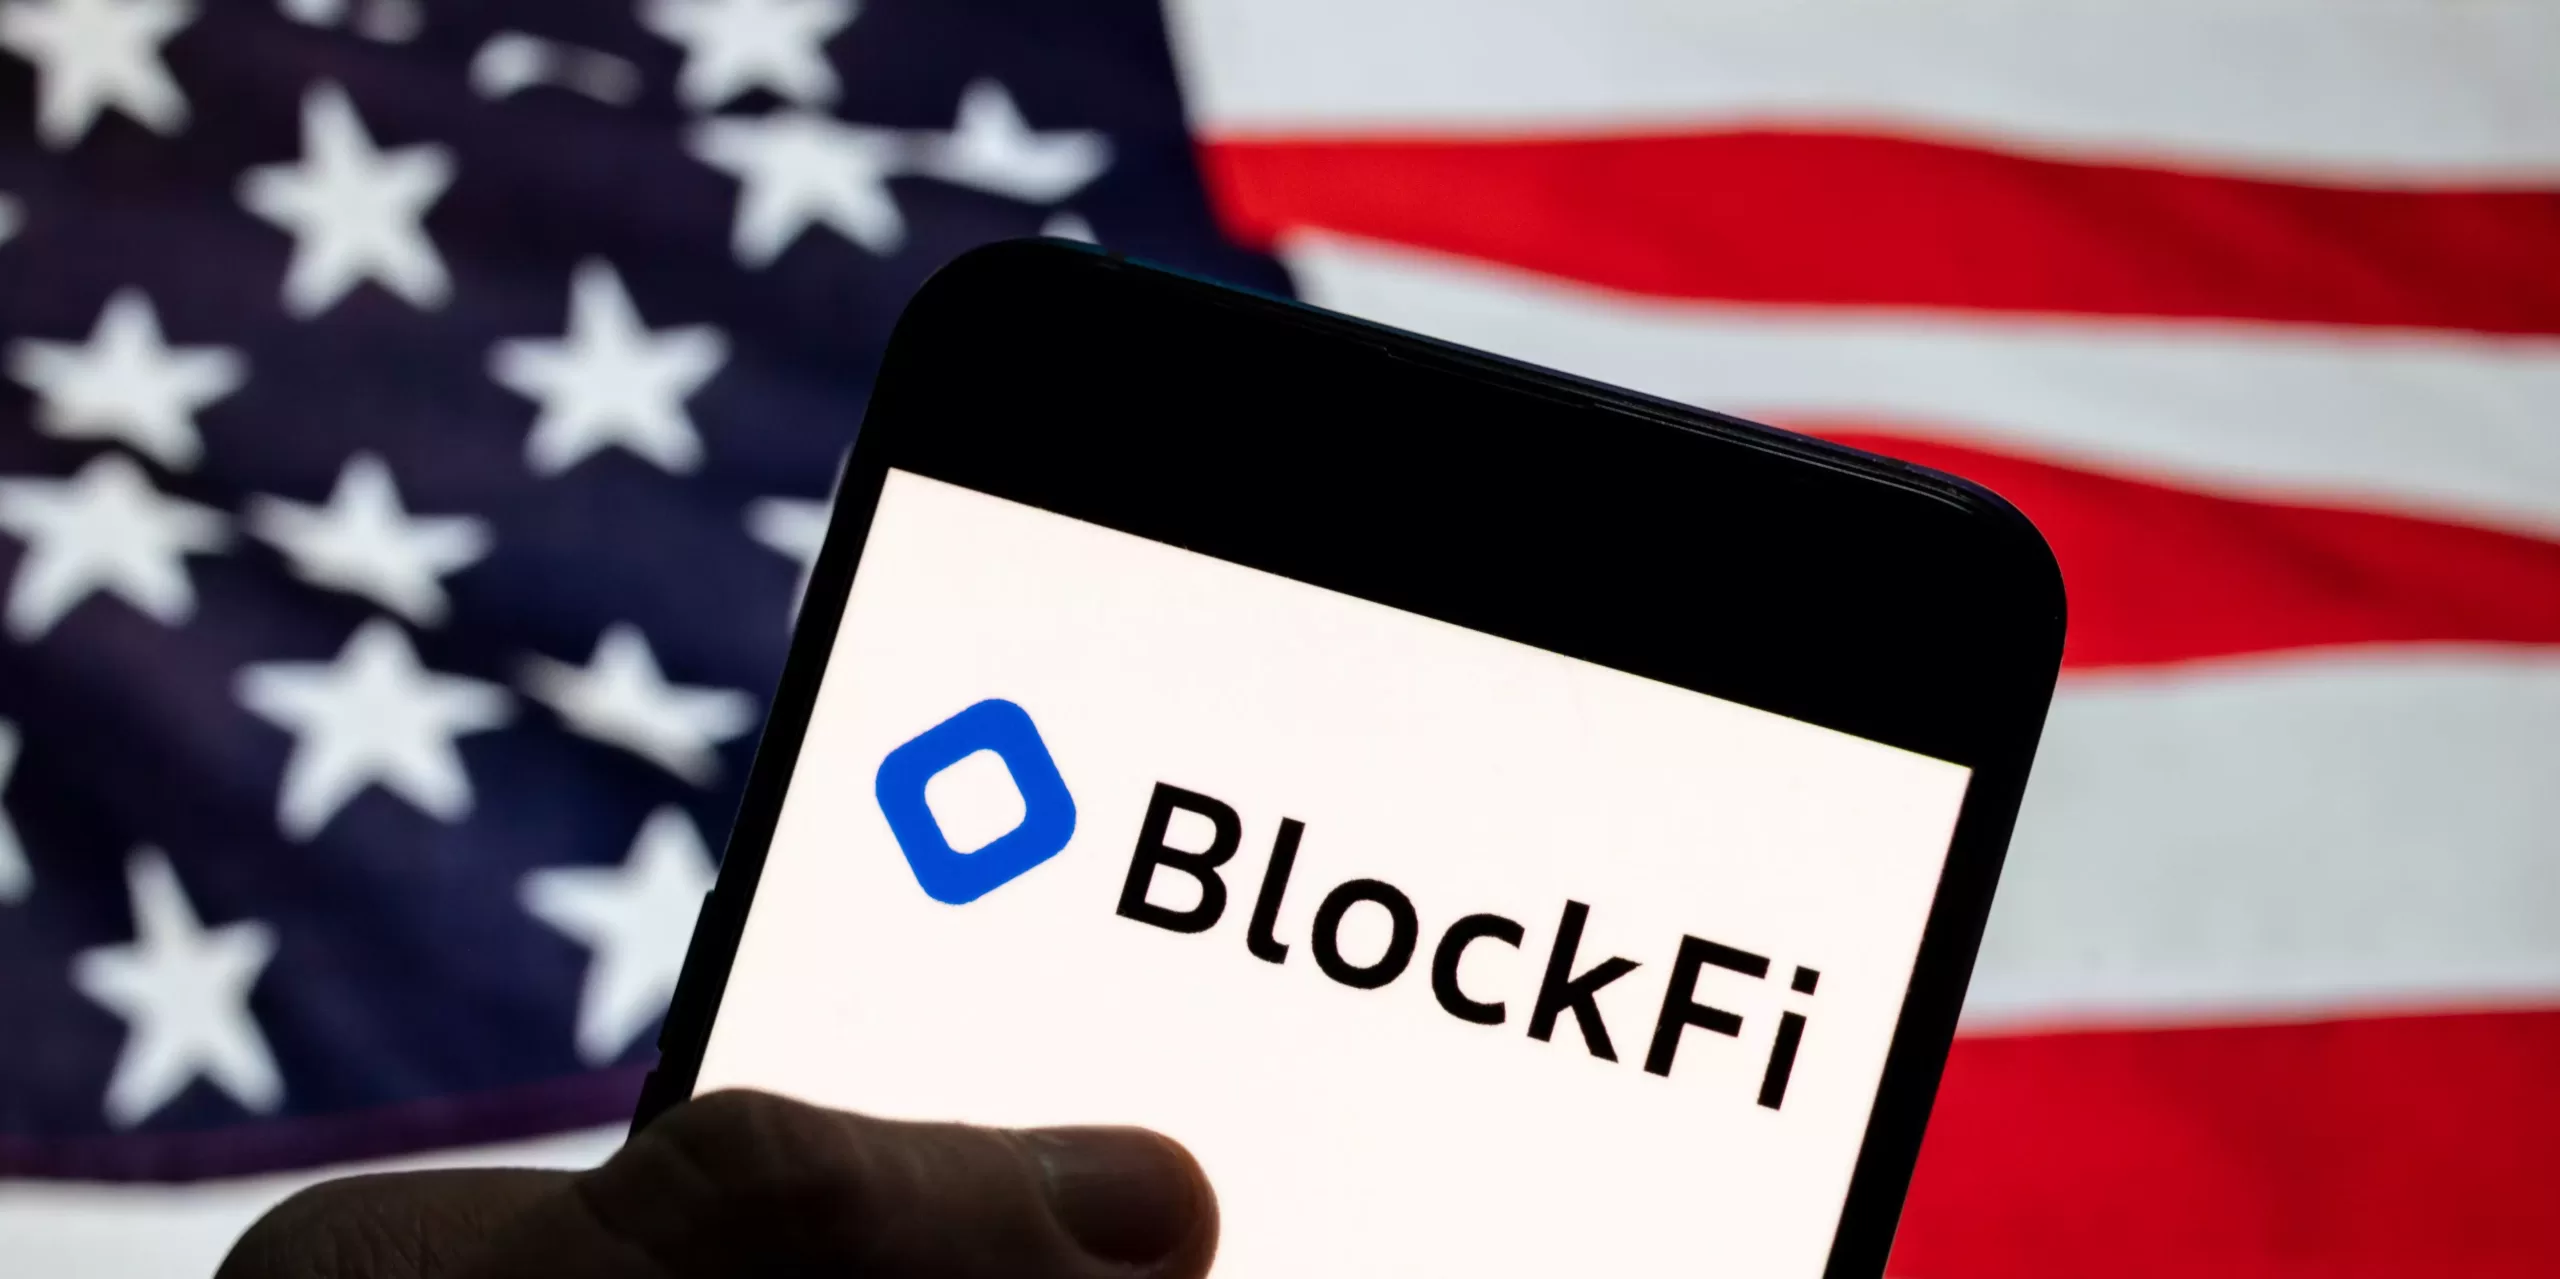 BlockFi admits it has significant exposure to collapsed exchange FTX 4